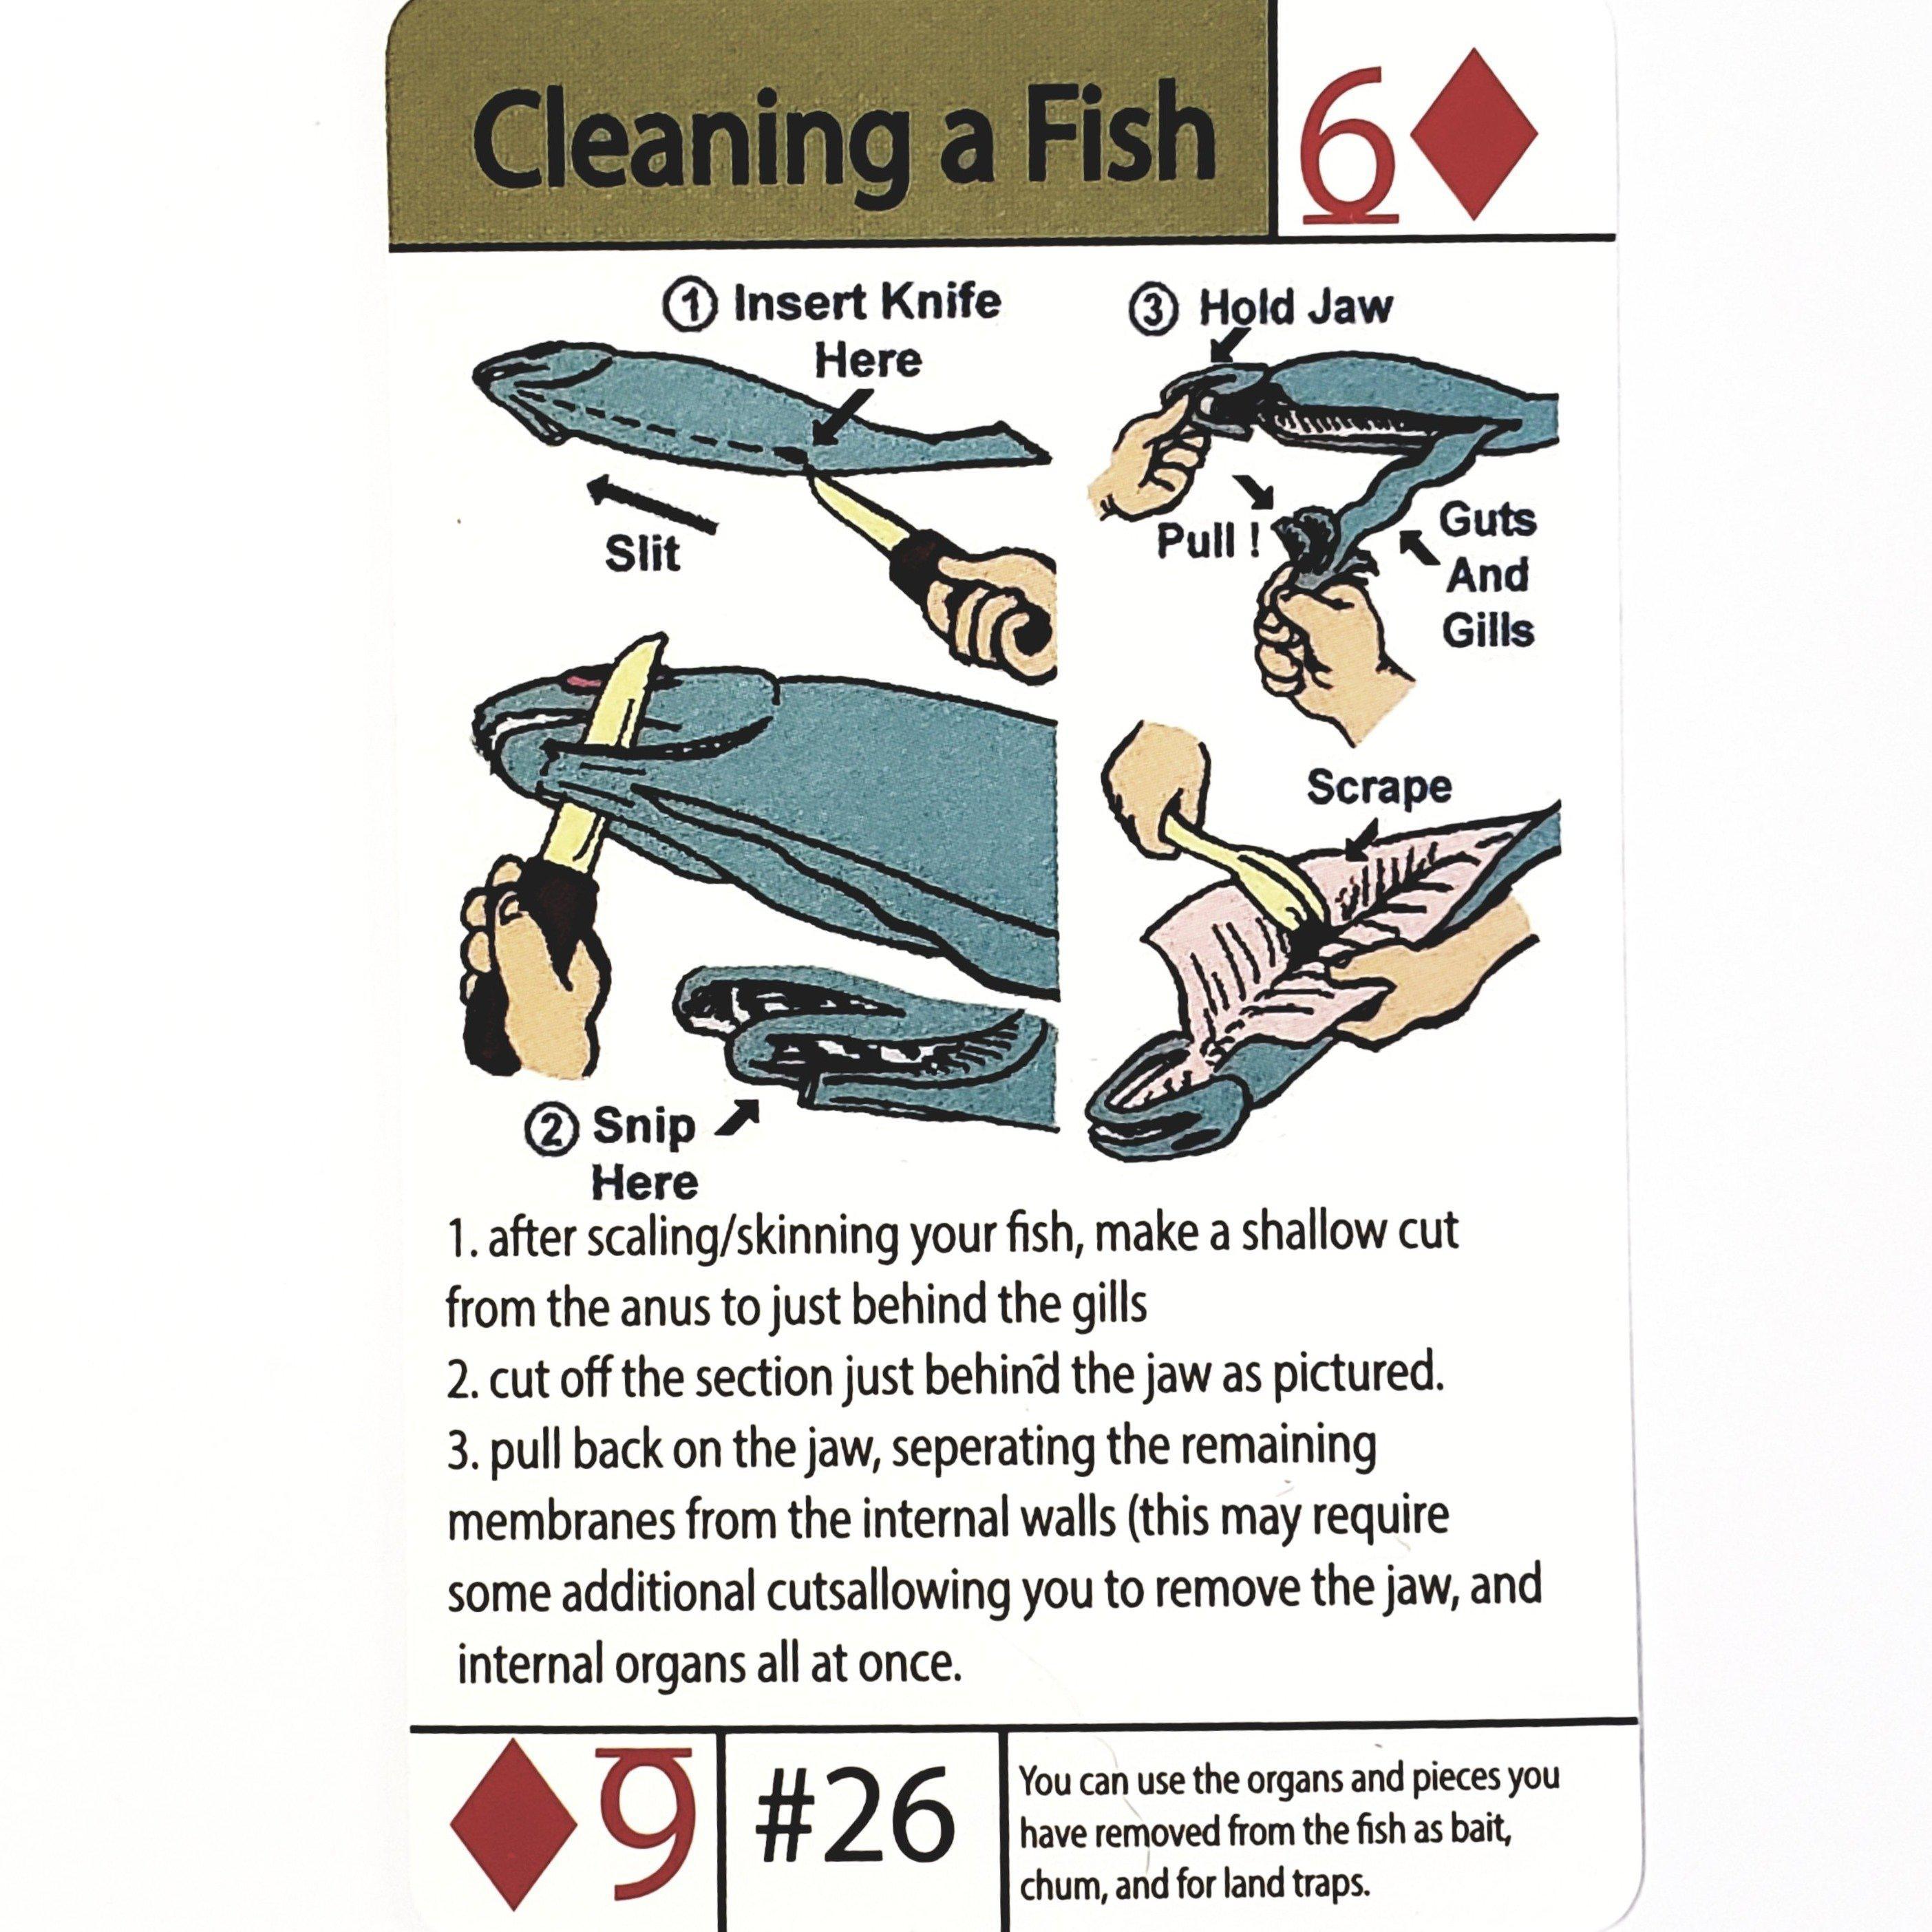 How to Clean a Fish, Tip Card #26